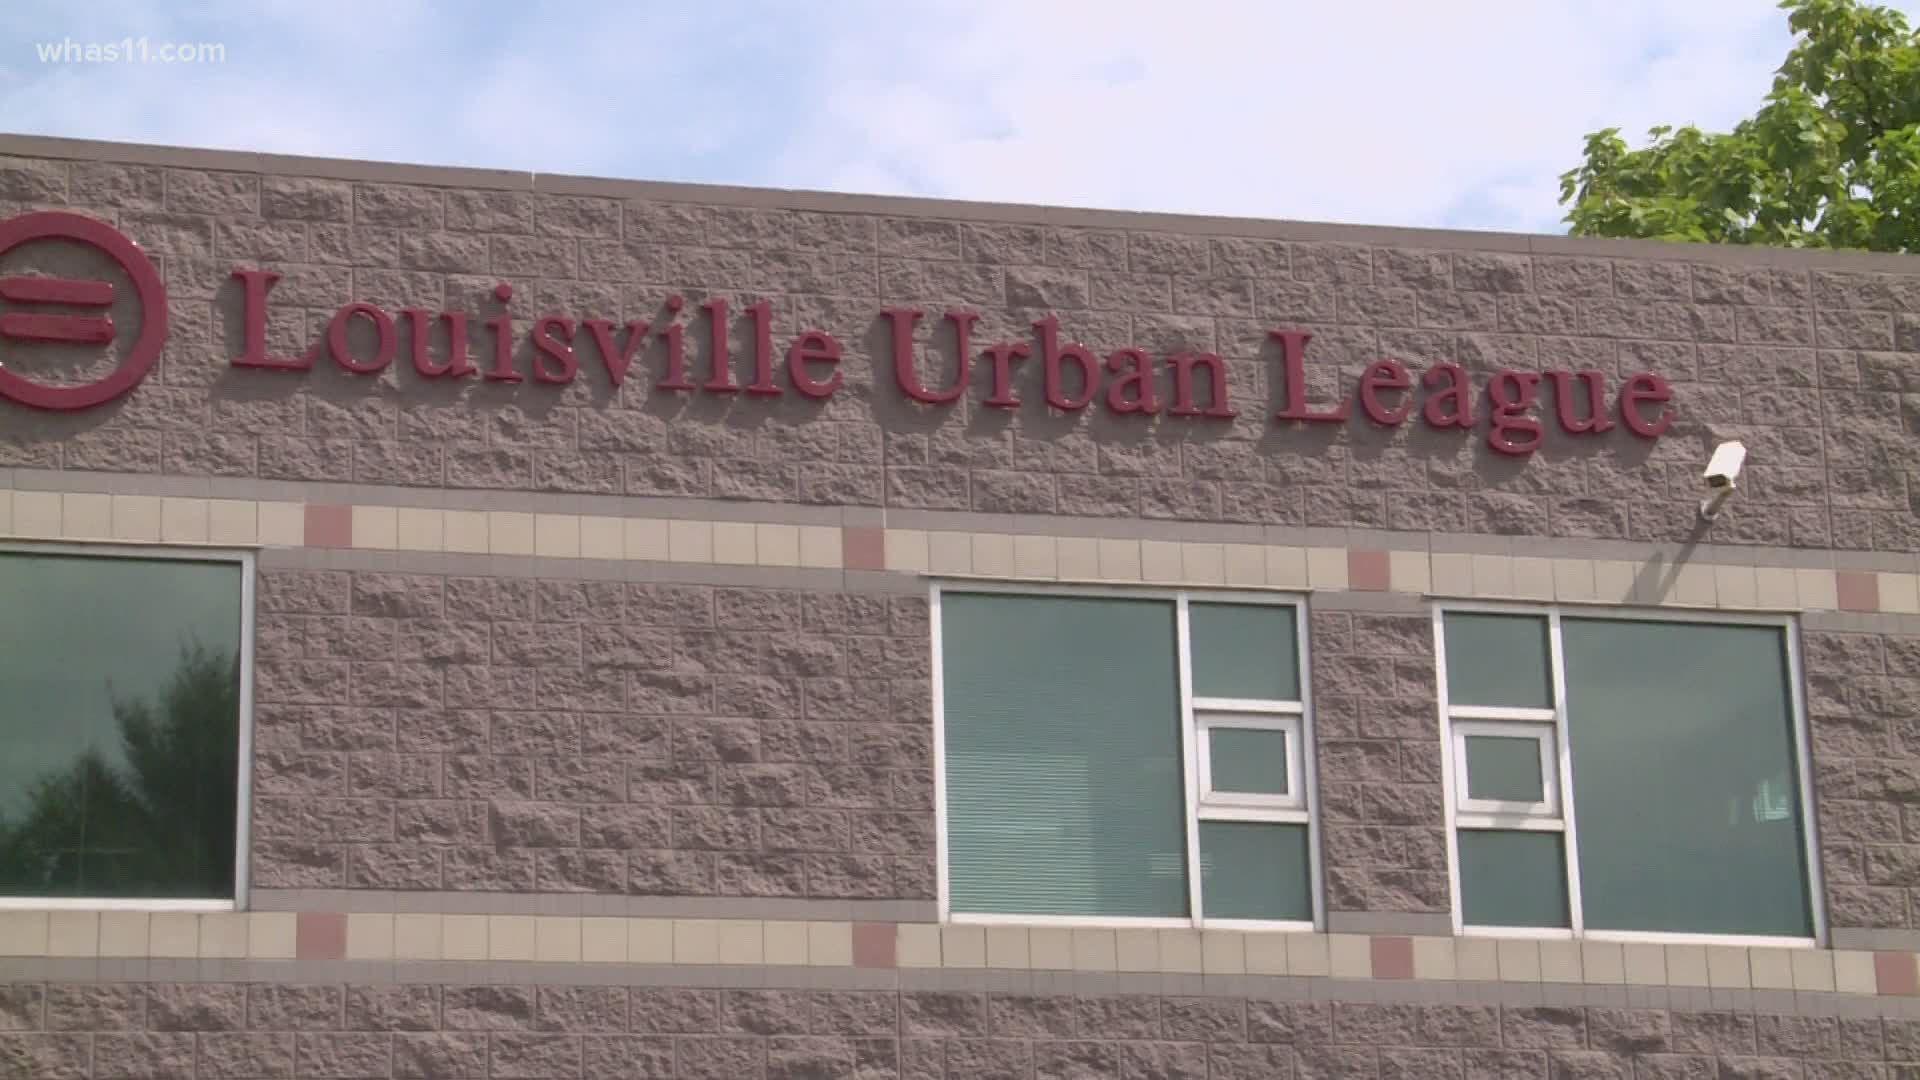 The Louisville Urban League is investing $8 million on 'Path Forward,' a project announced by more than 50 community leaders this year.